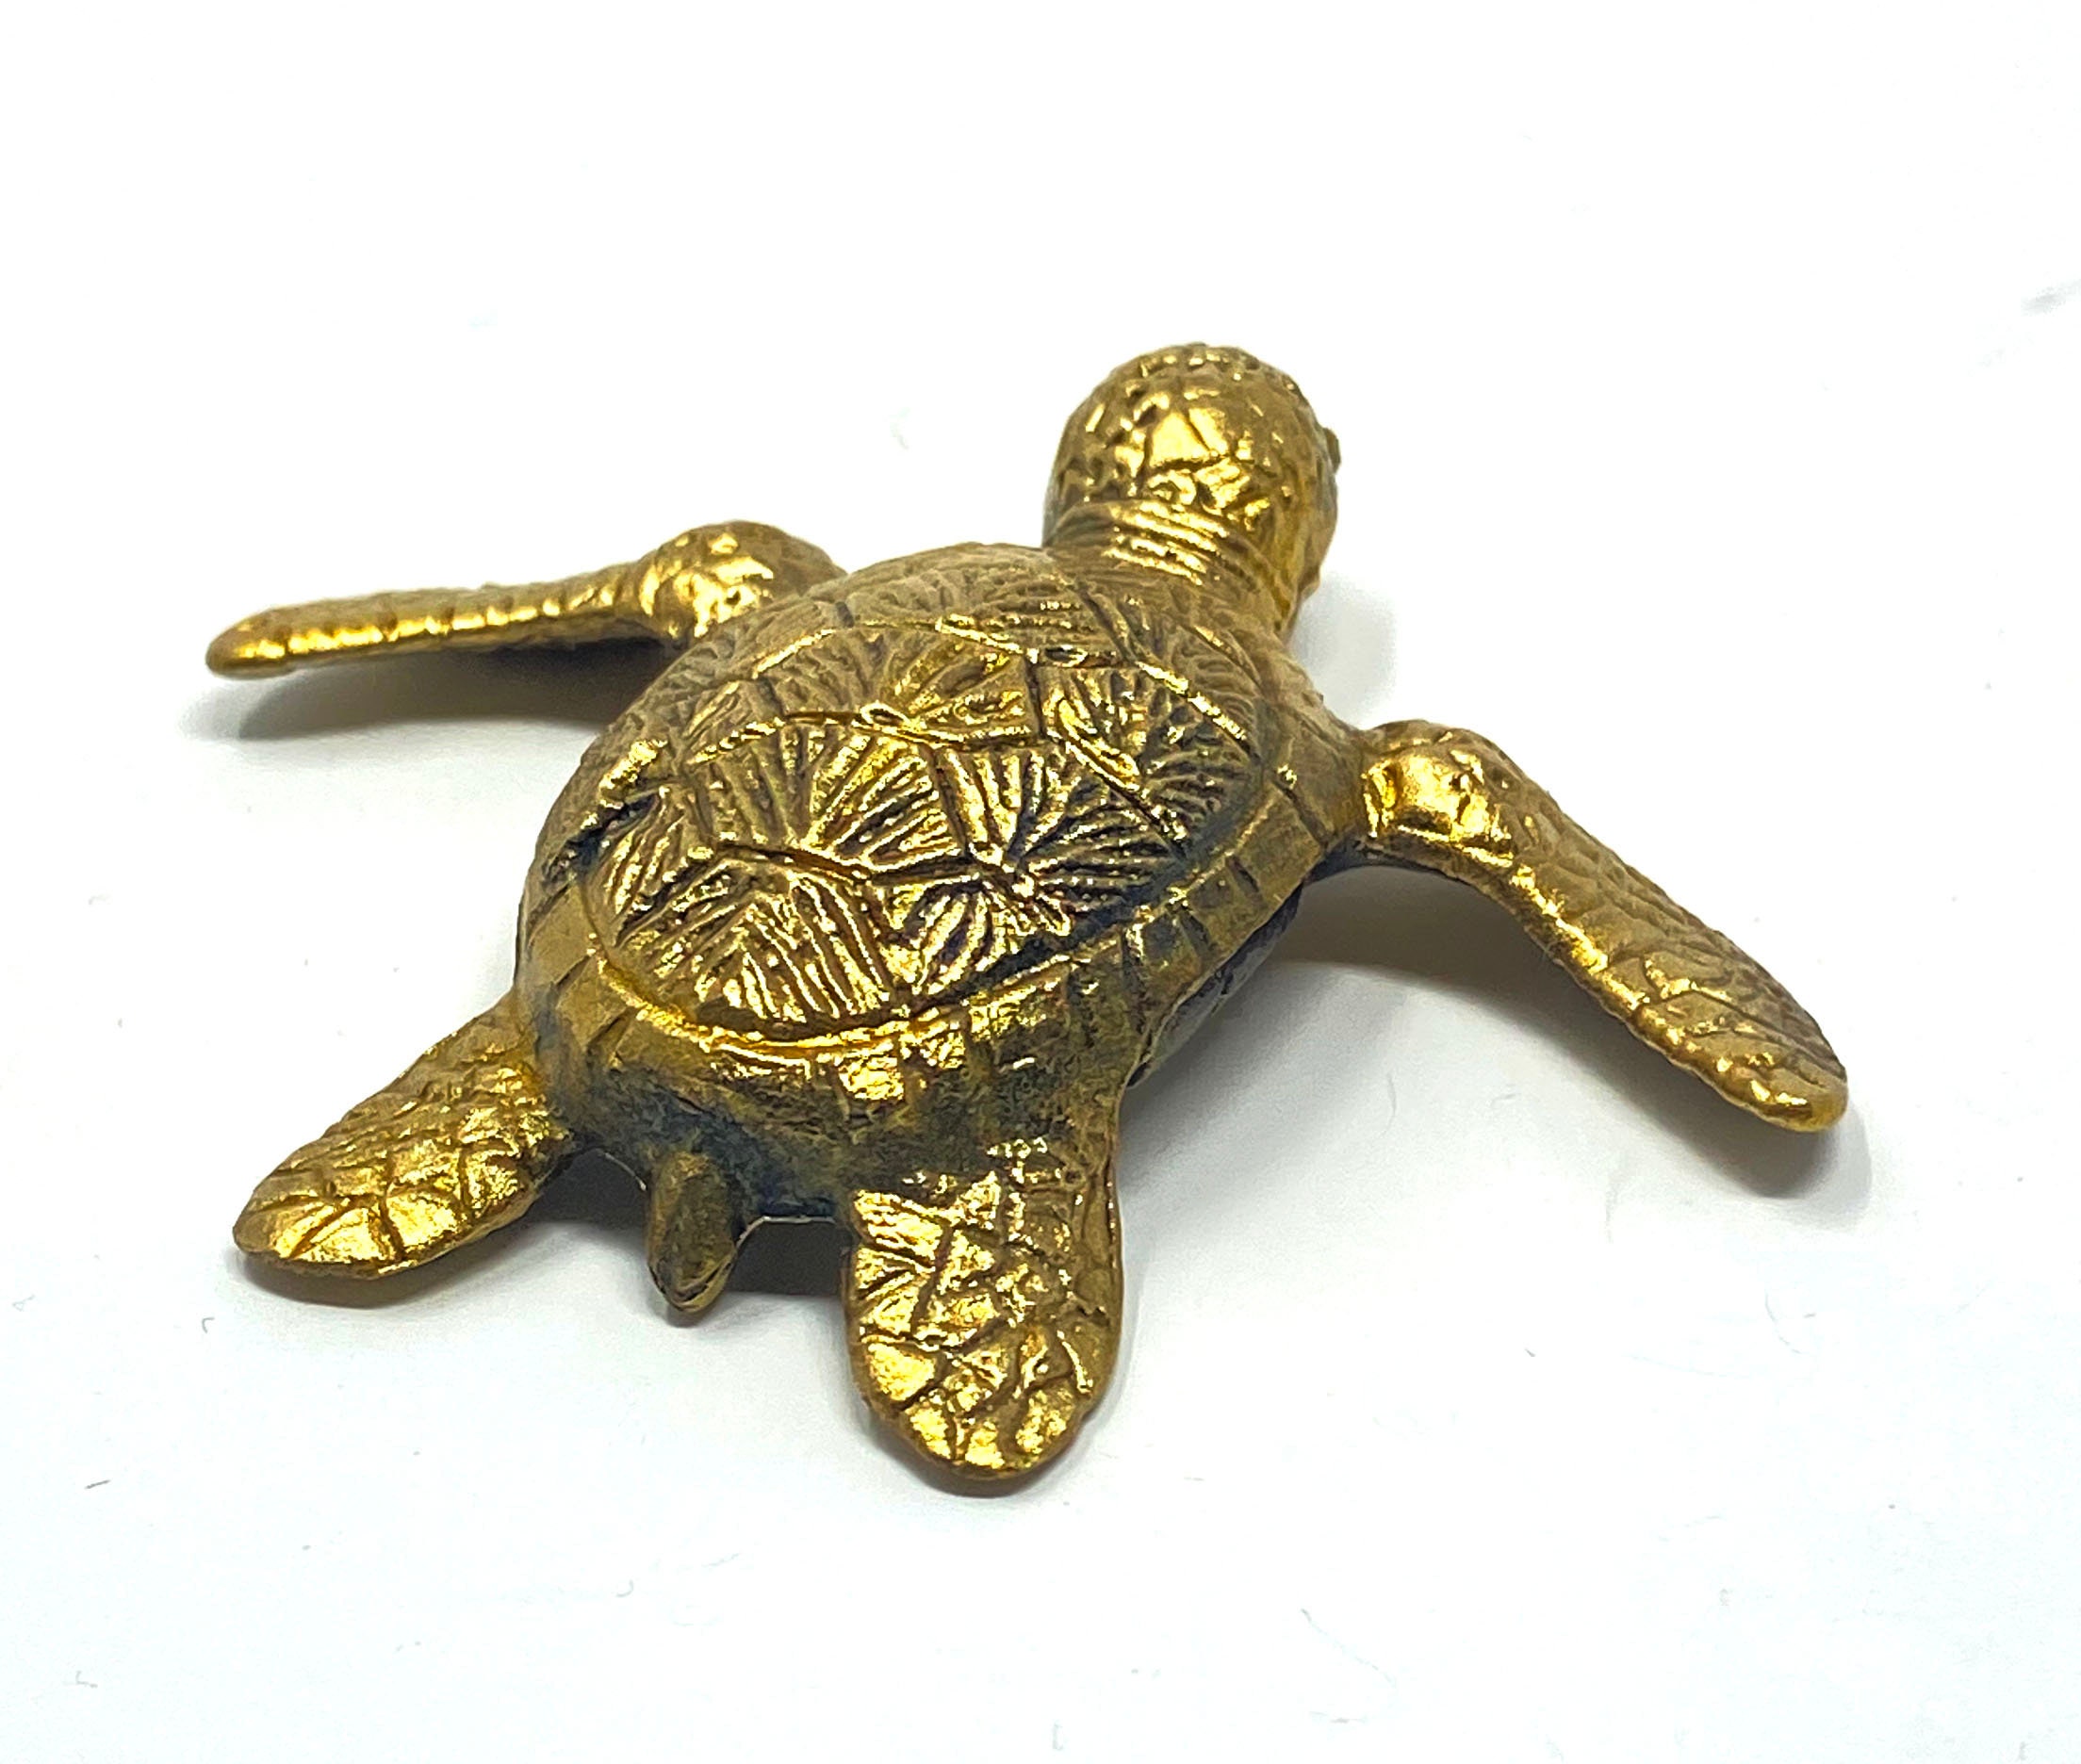 Solid Brass Decorative turtle Home Decoration Collection | Etsy